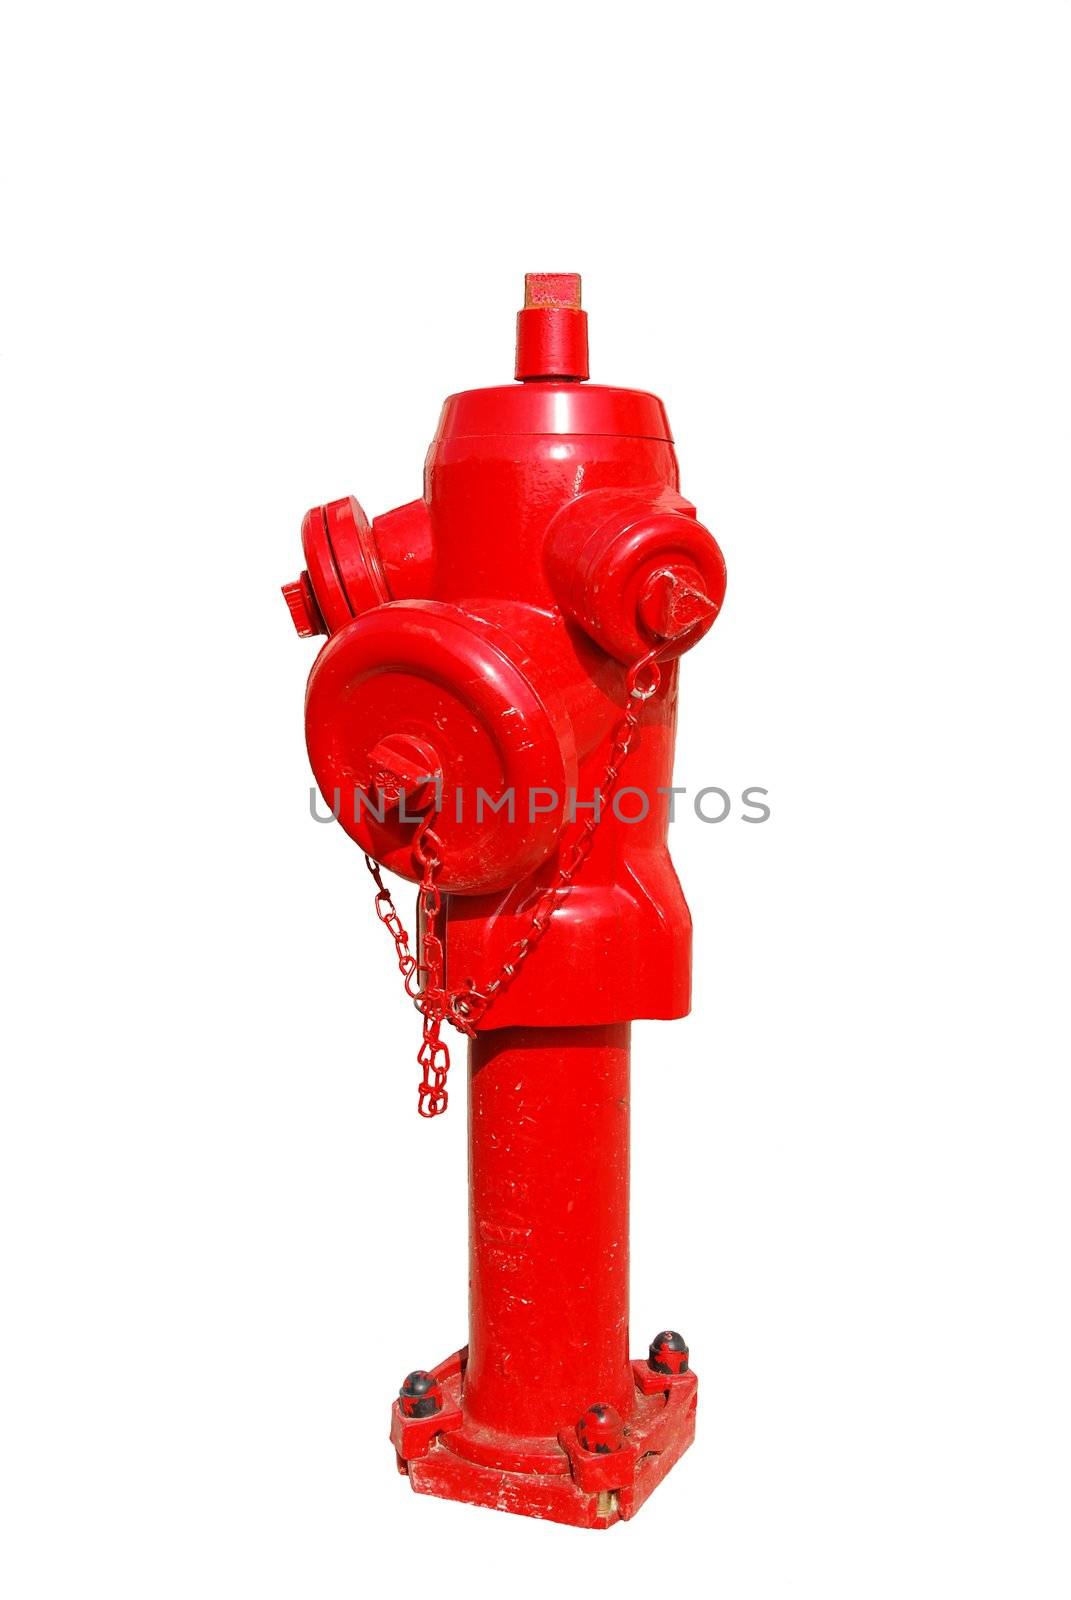 Red fire hydrant isolated on a white background by luissantos84